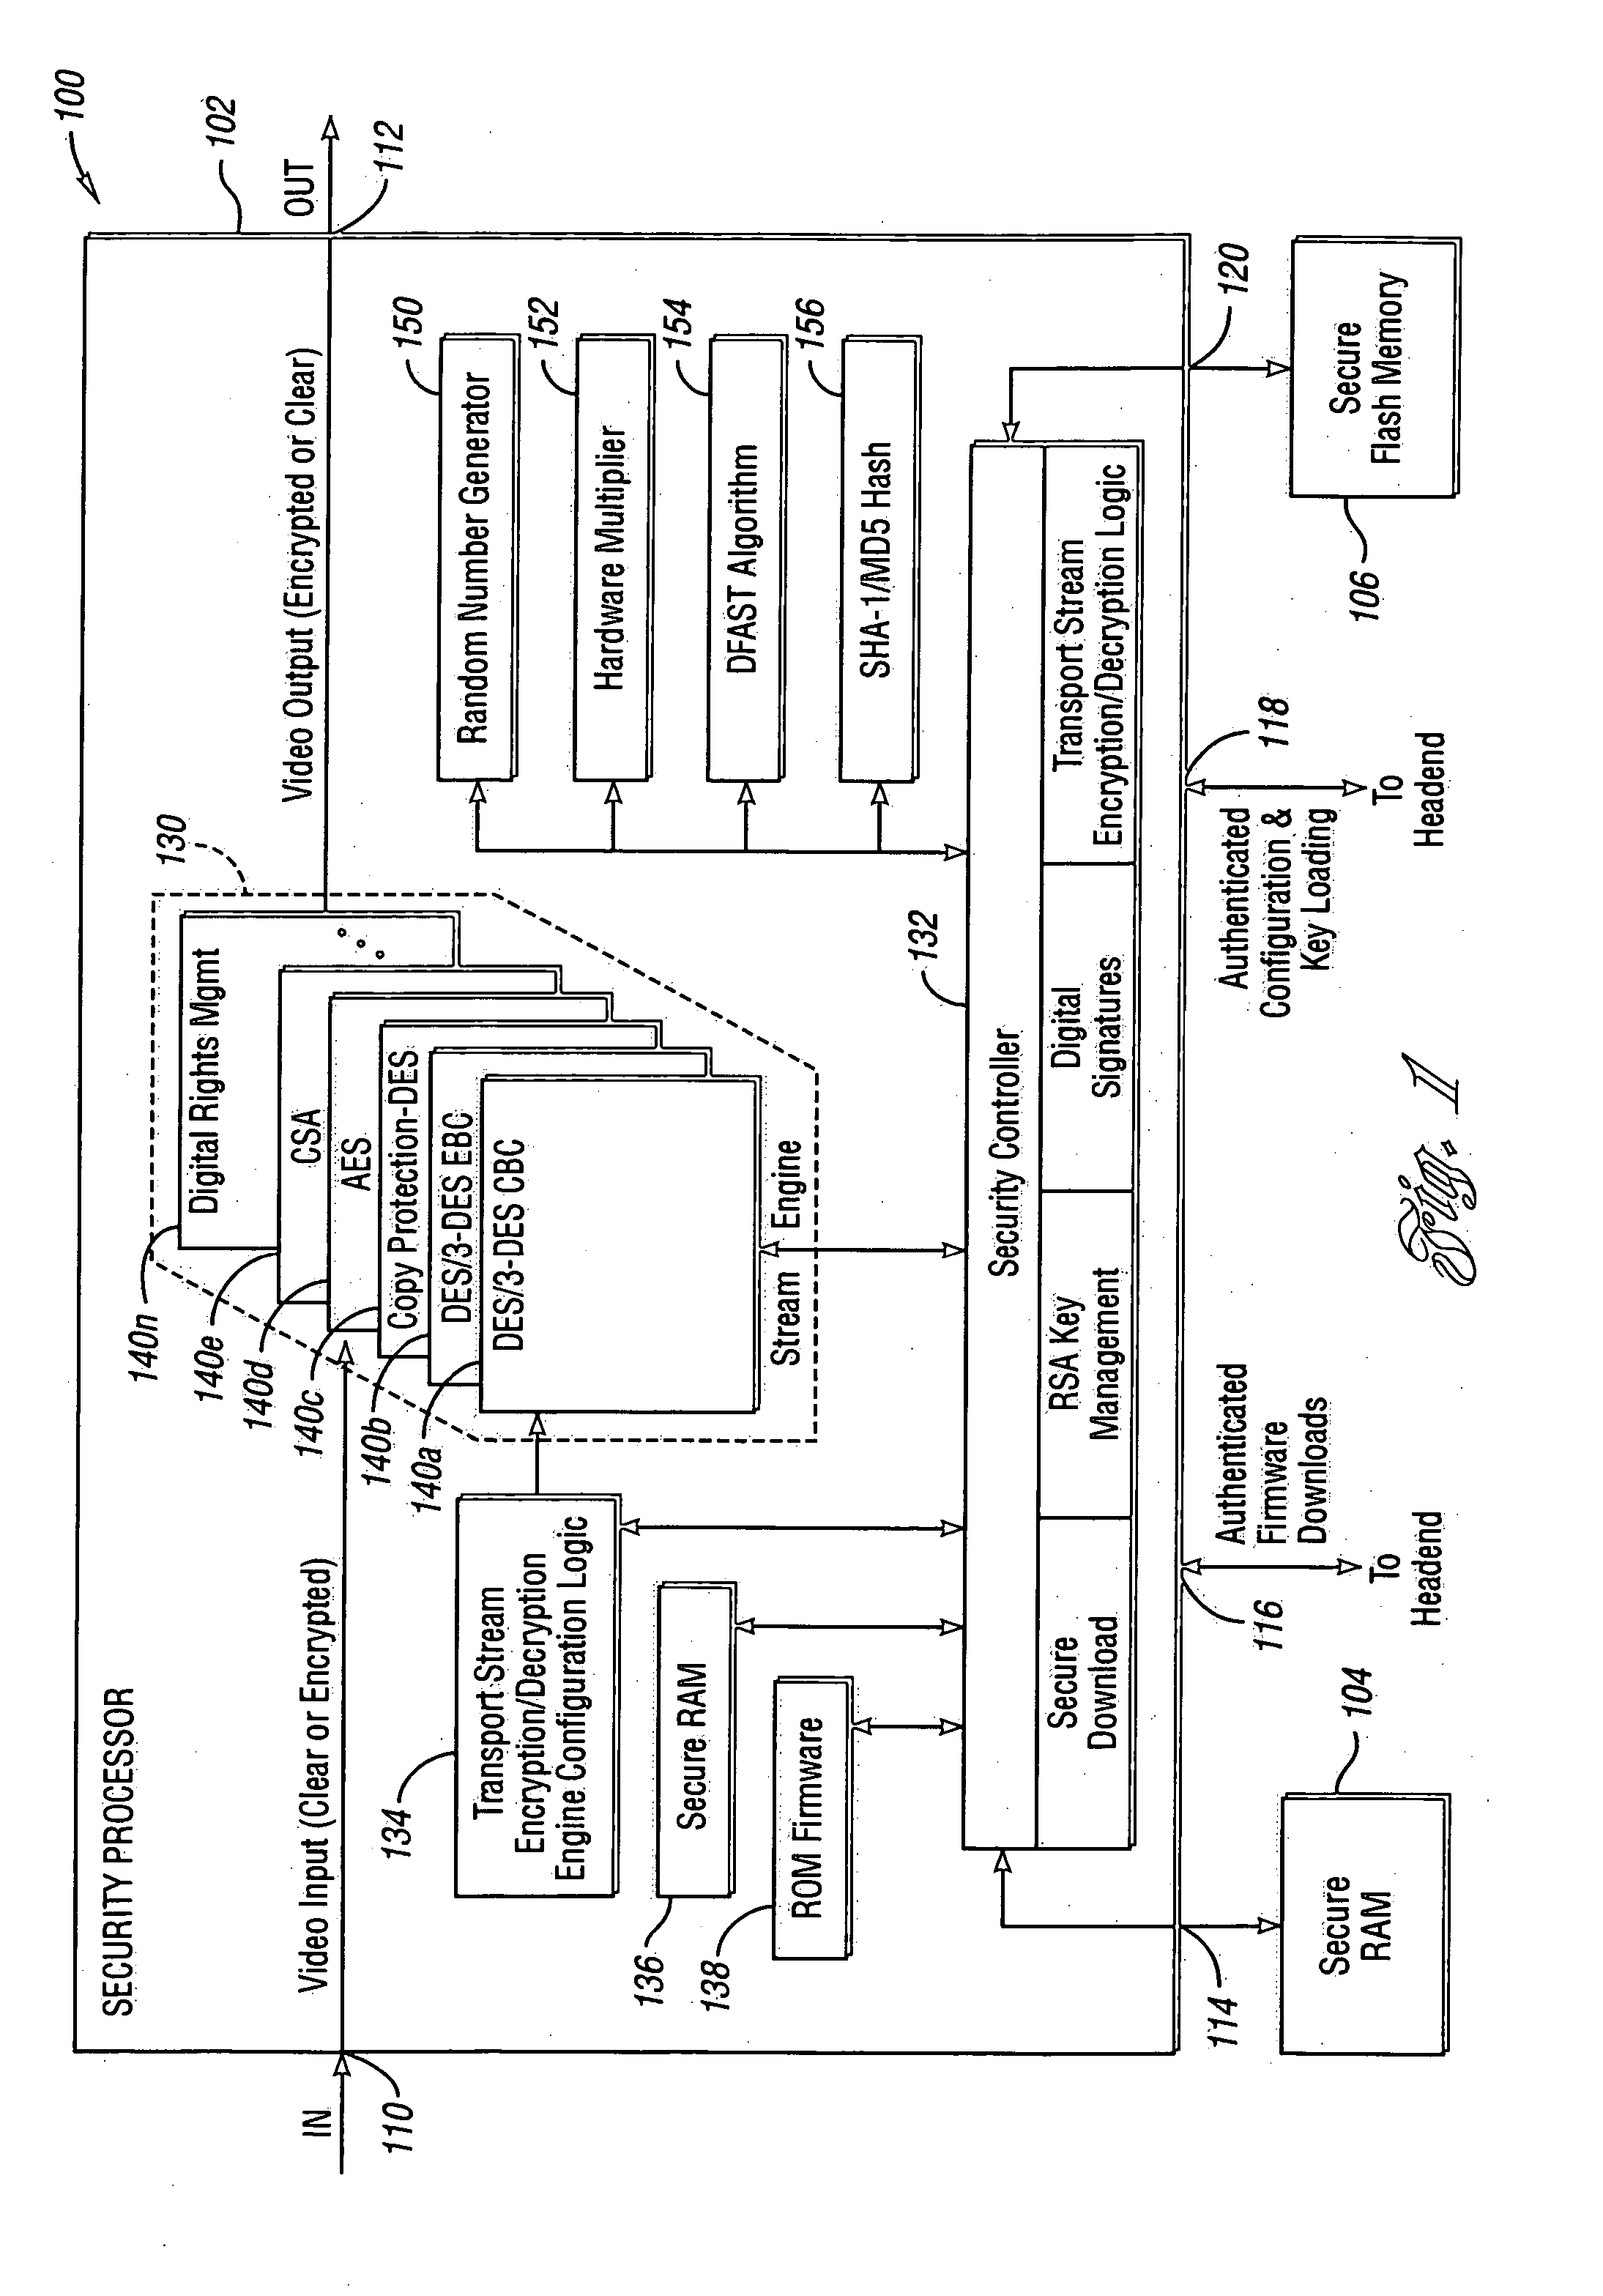 System and method for security processing media streams